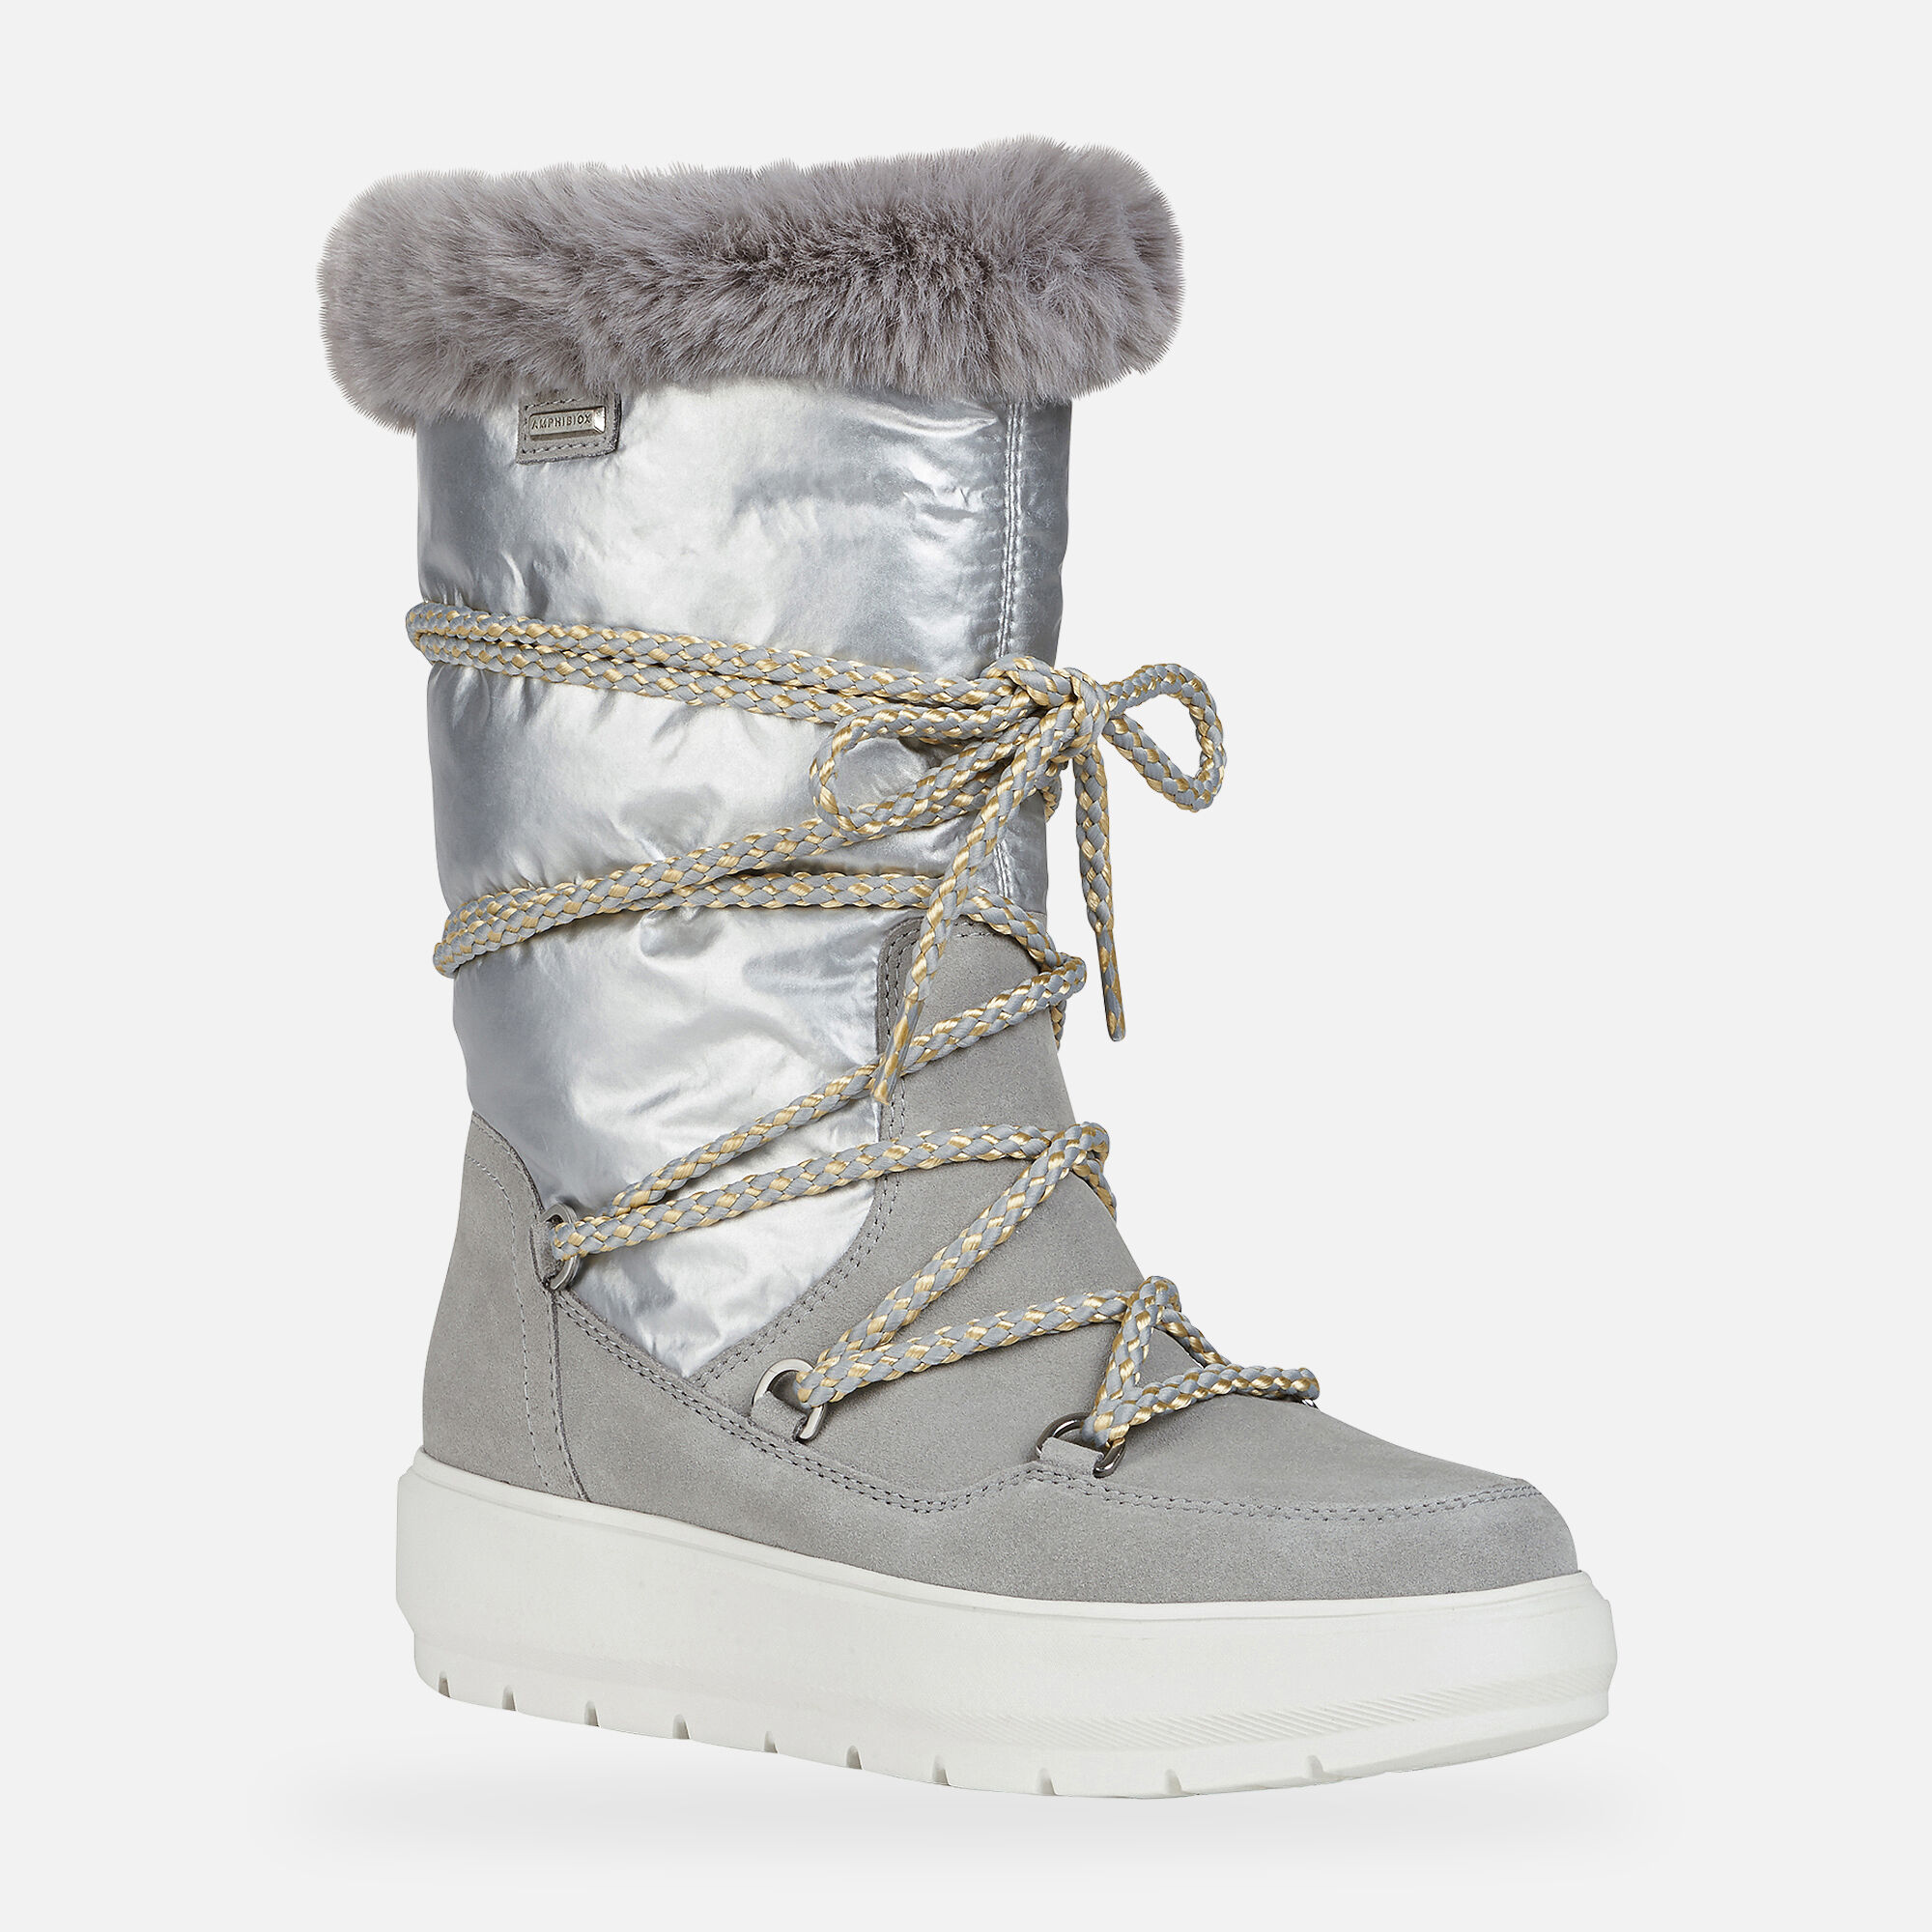 geox winter boots womens